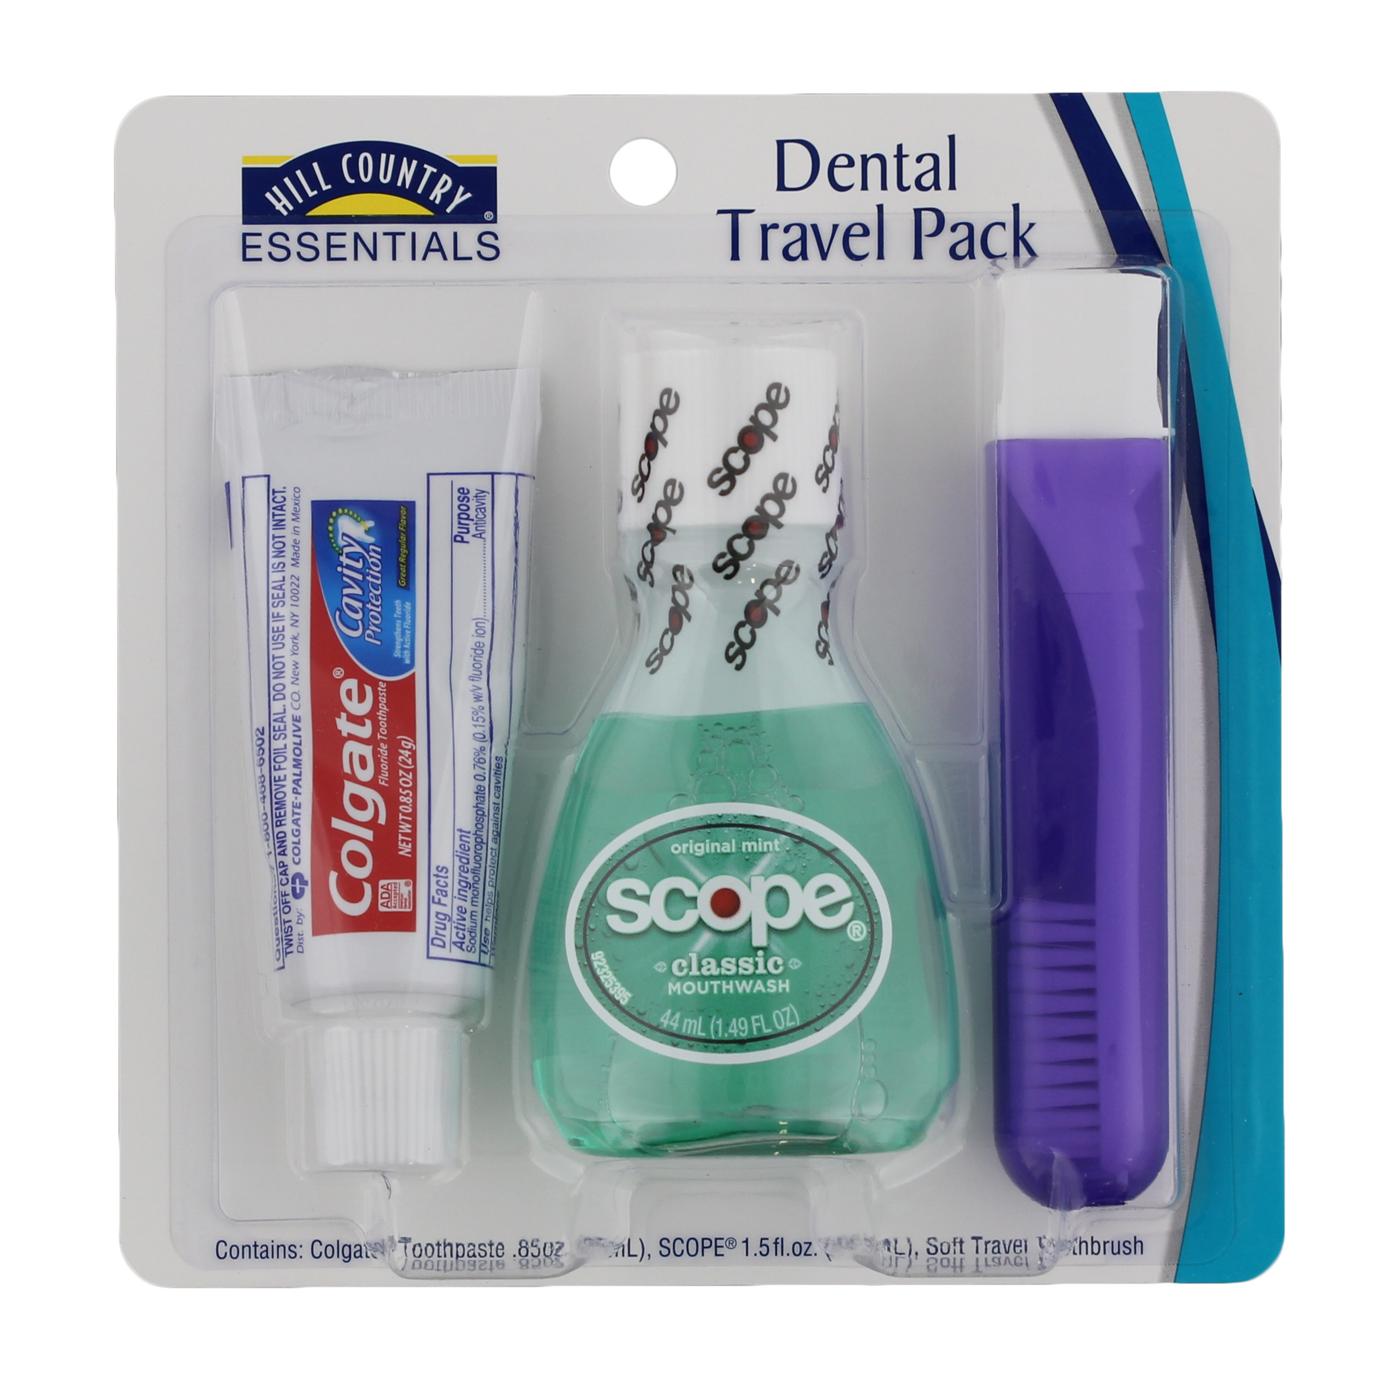 Hill Country Essentials Travel Size Dental Pack - Assorted; image 3 of 5